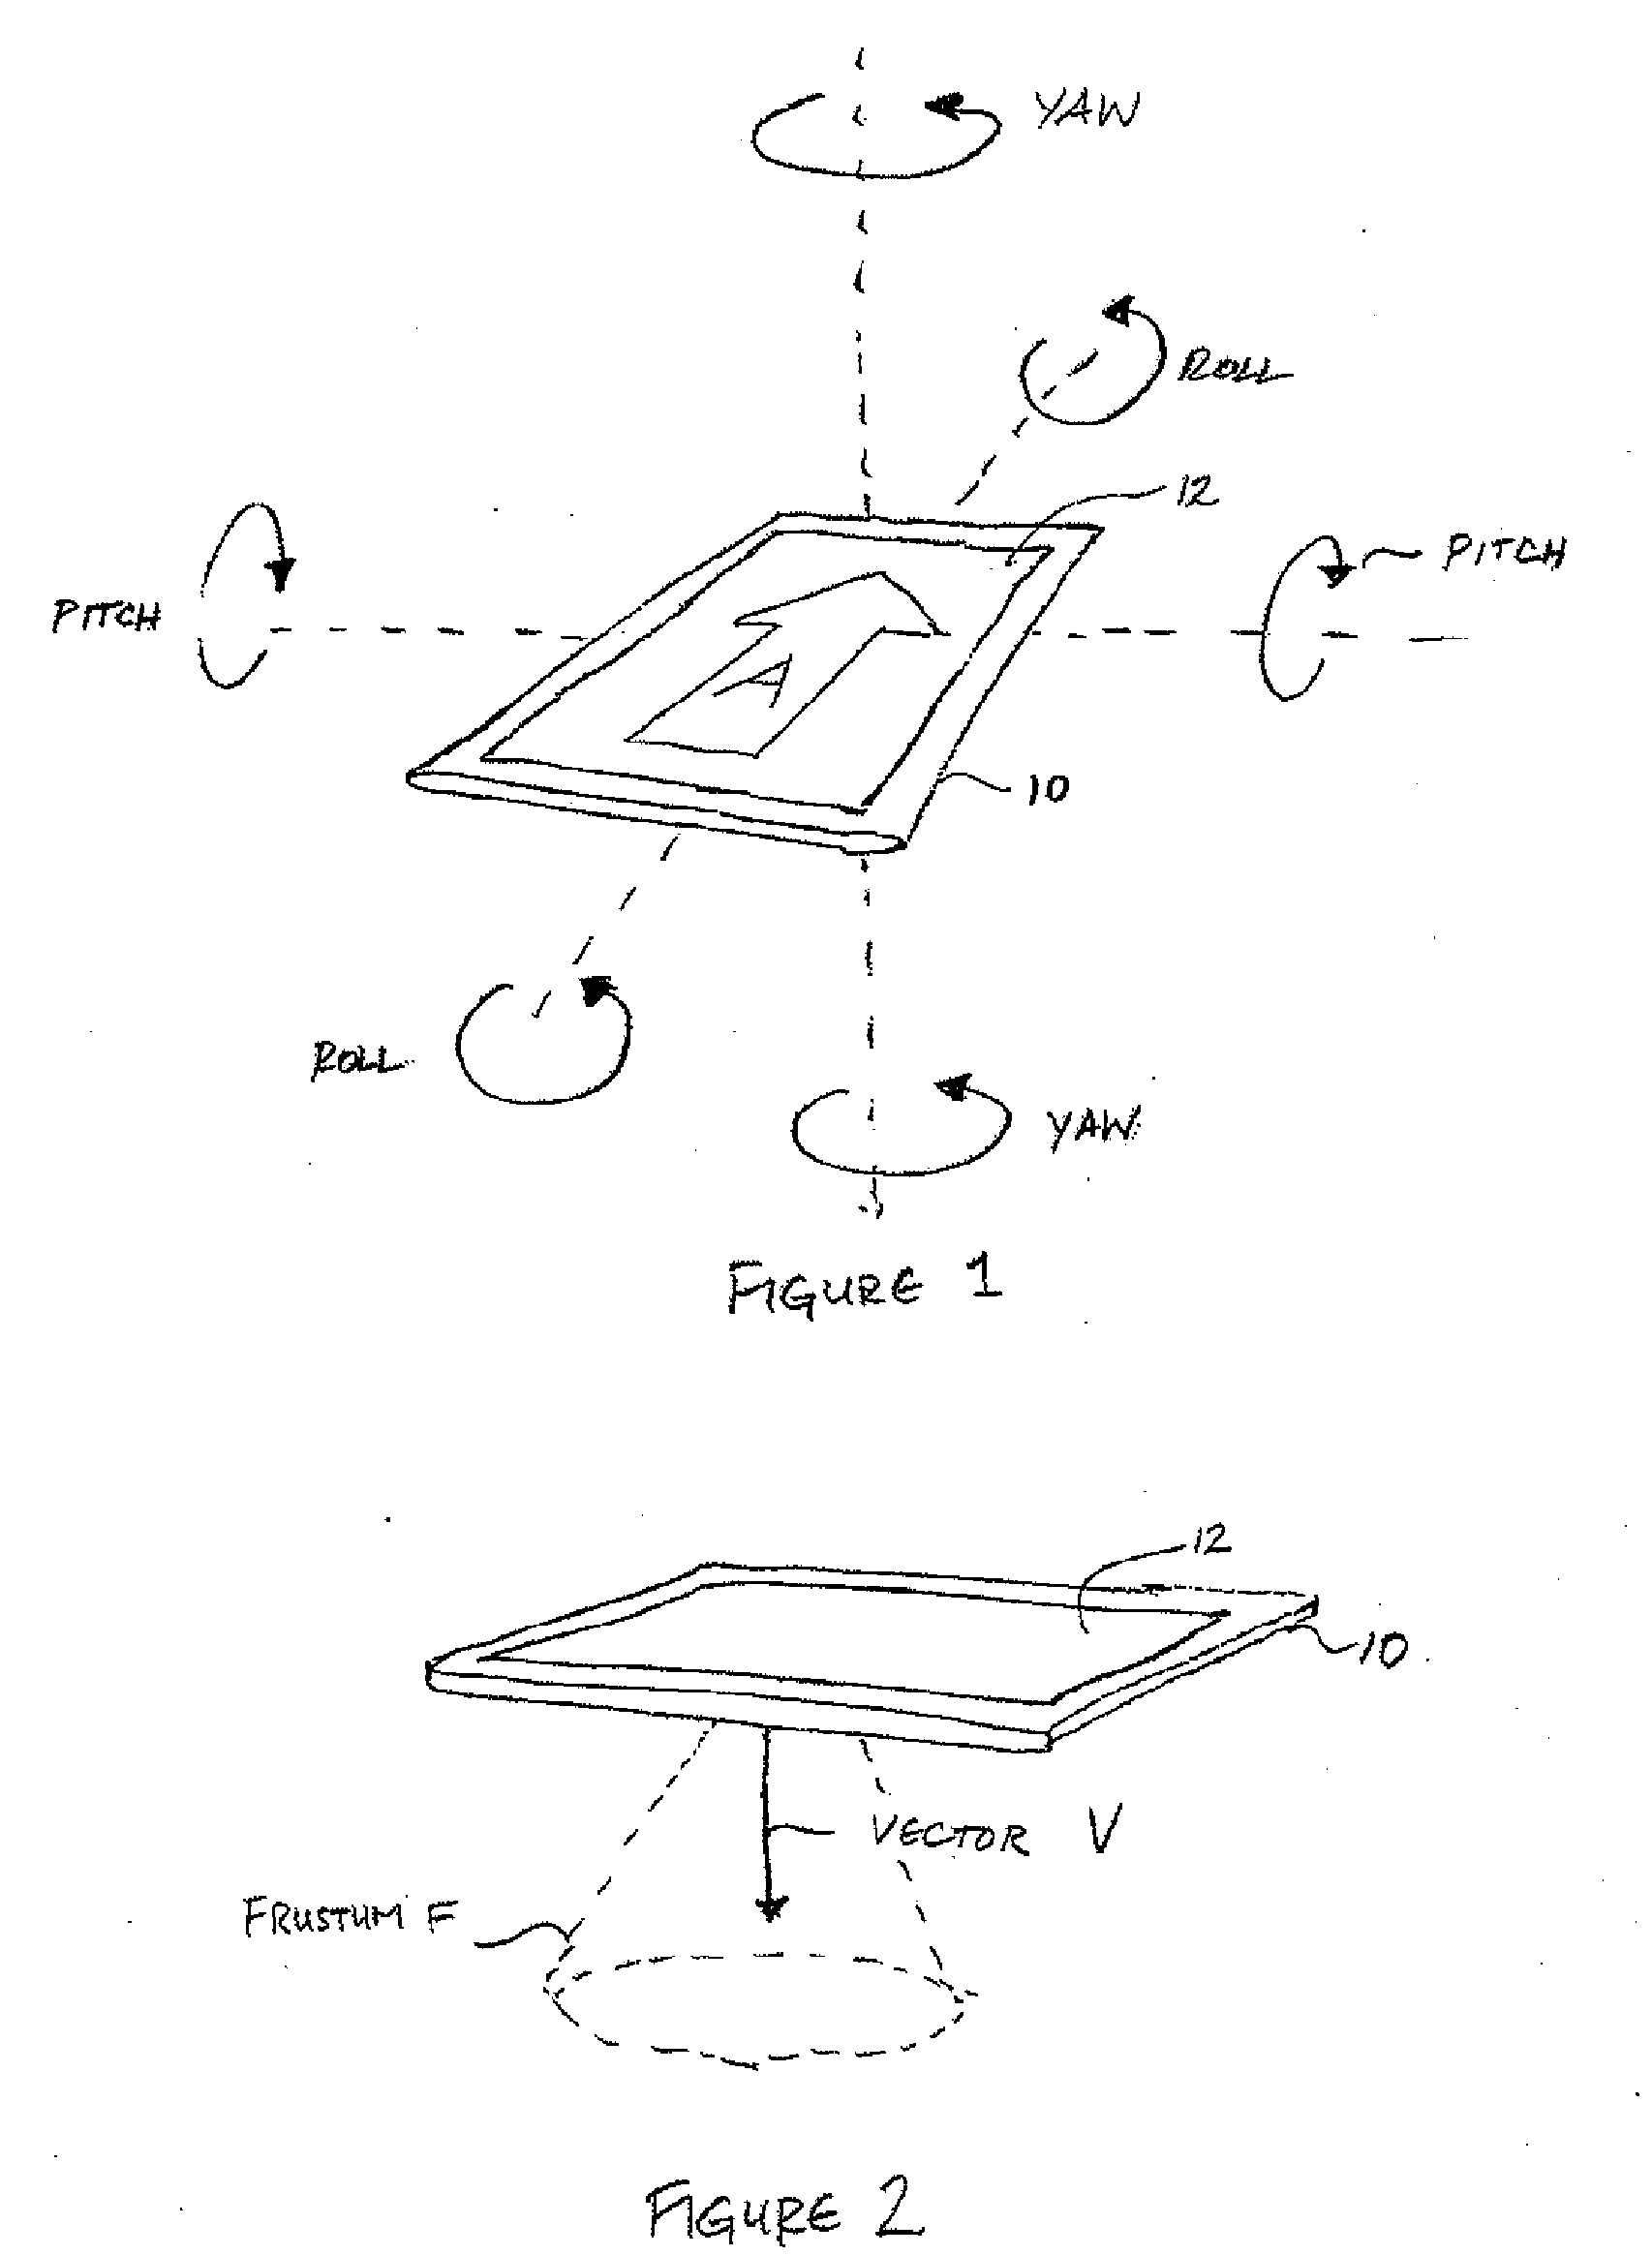 System and method for presenting virtual and augmented reality scenes to a user